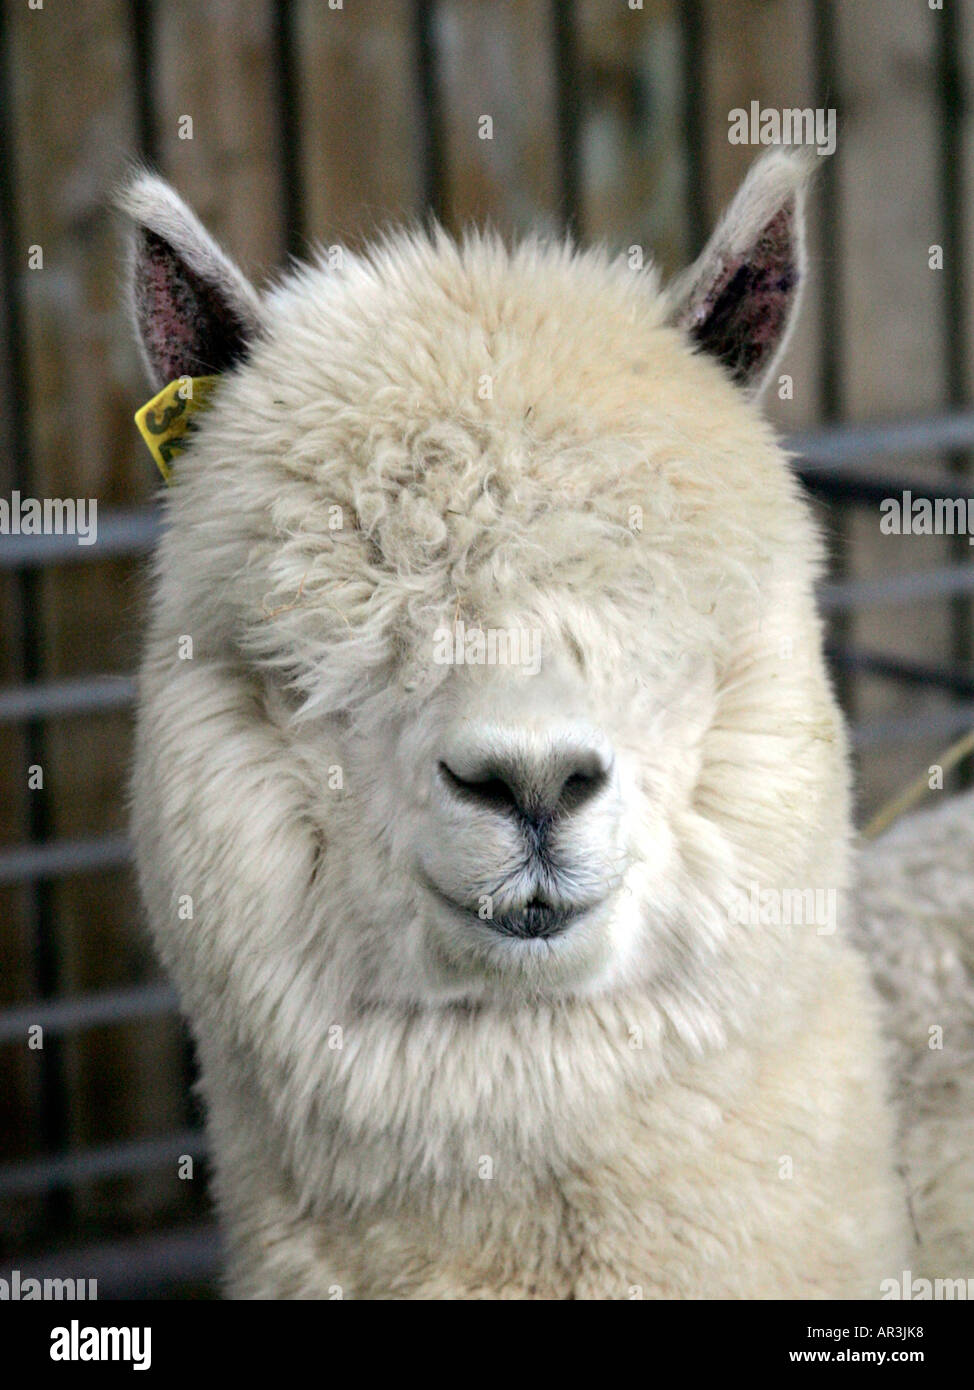 White alpaca with thick long fur. Stock Photo